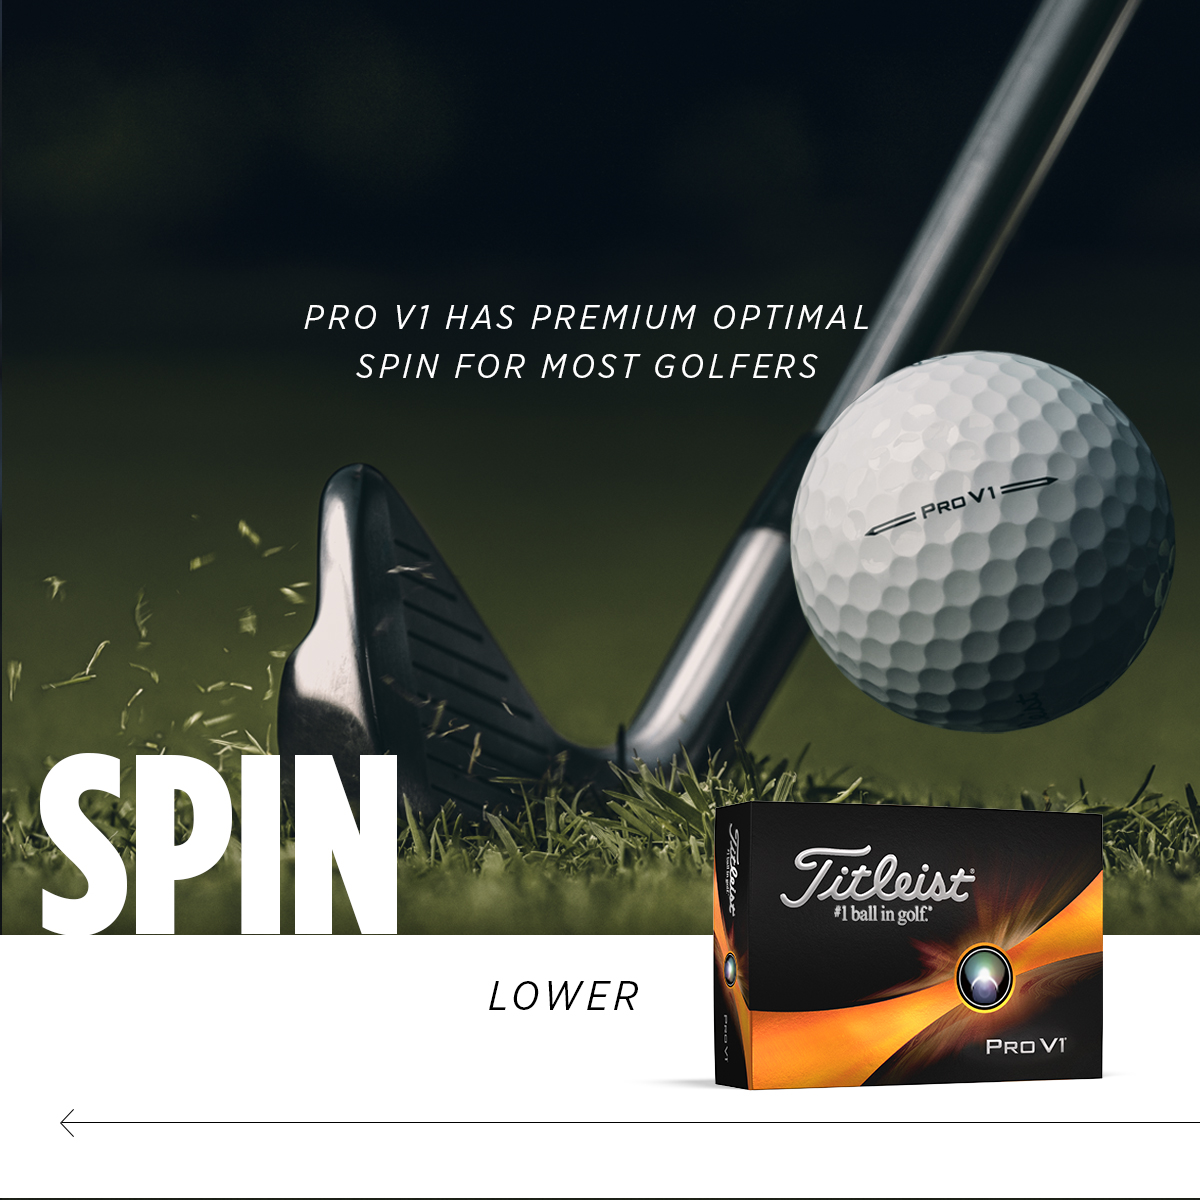 Pro V1 has premium optimal spin for most golfers 